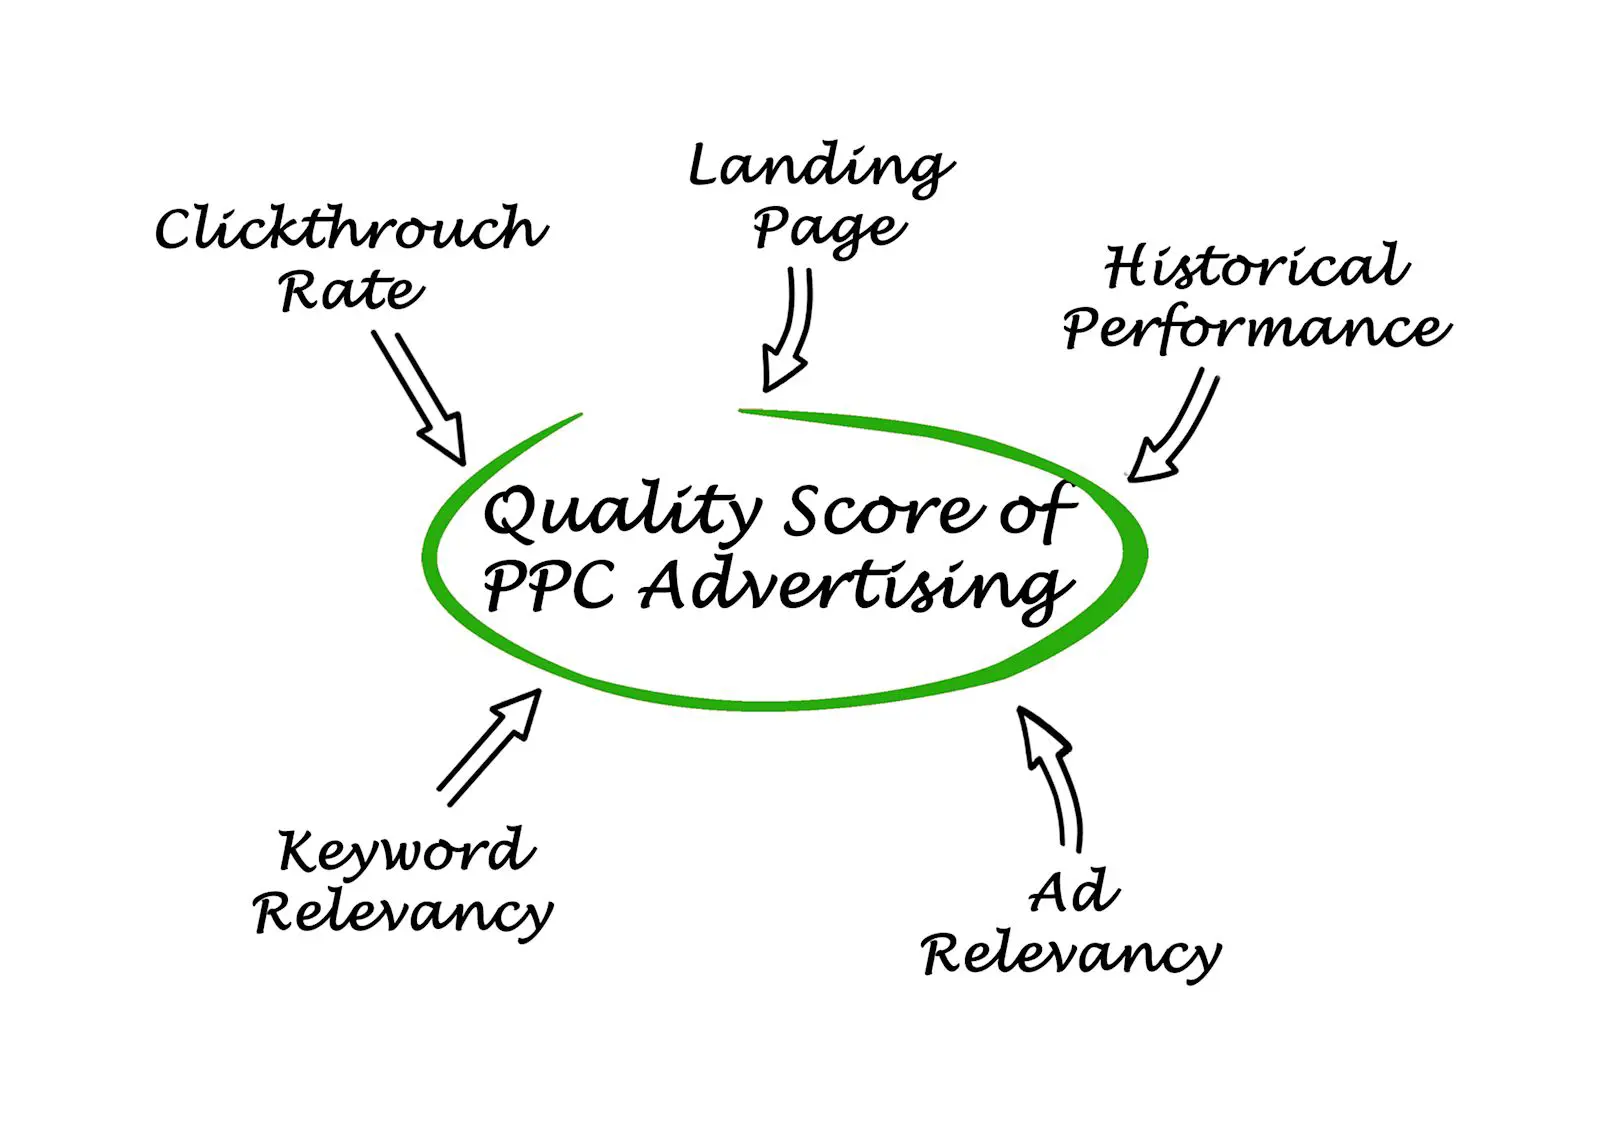 Thumbnail for Why Quality Scores and Backlinks are Important for Search Engine Ranking